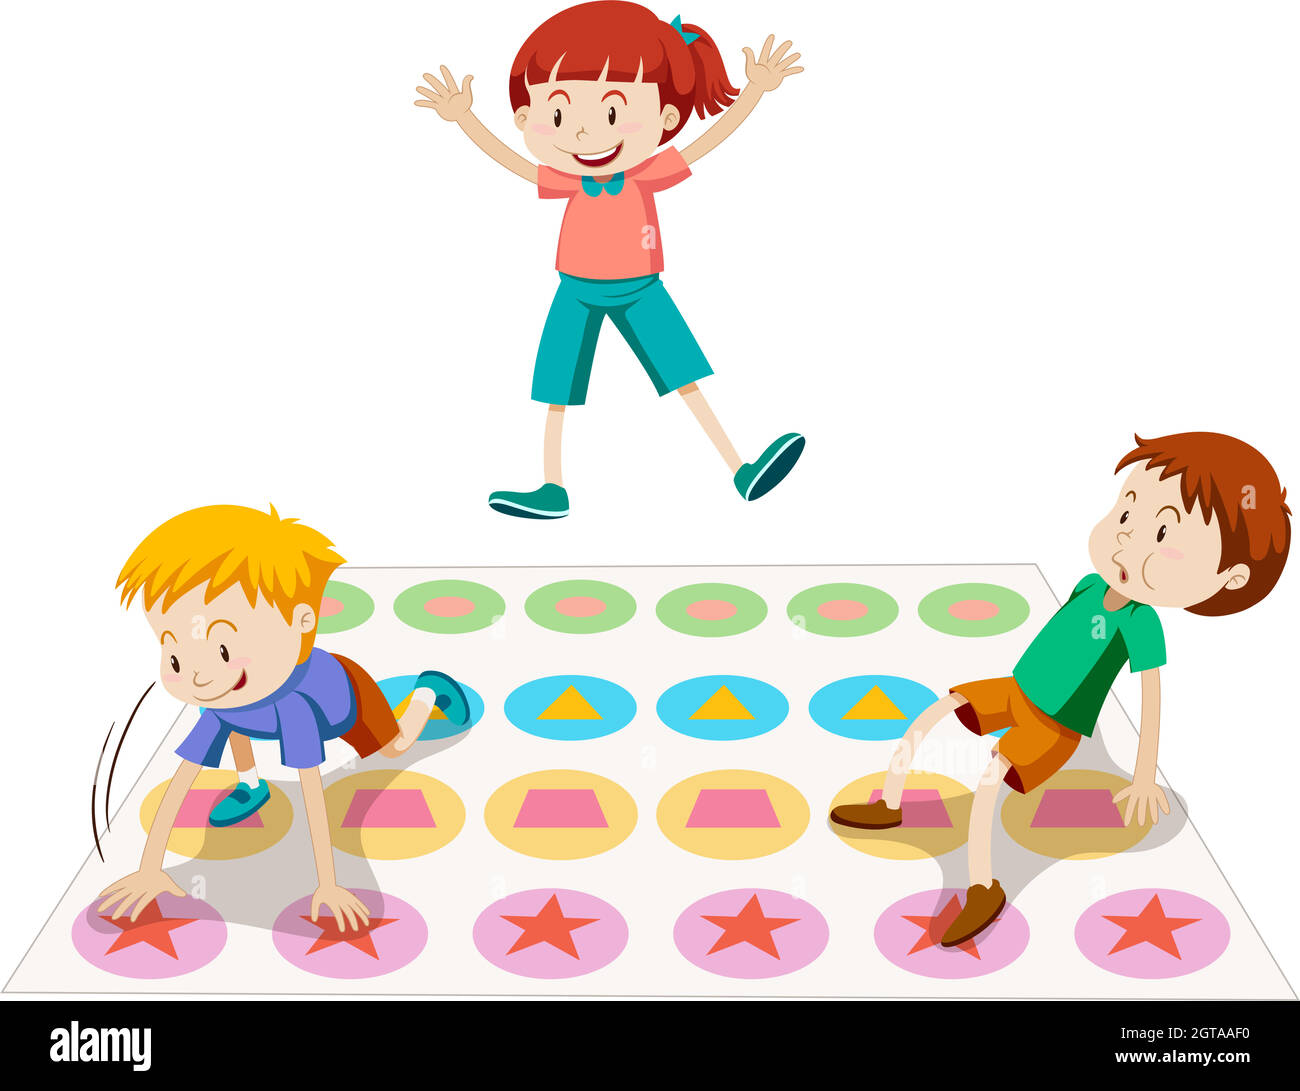 Children playing twister together Stock Vector